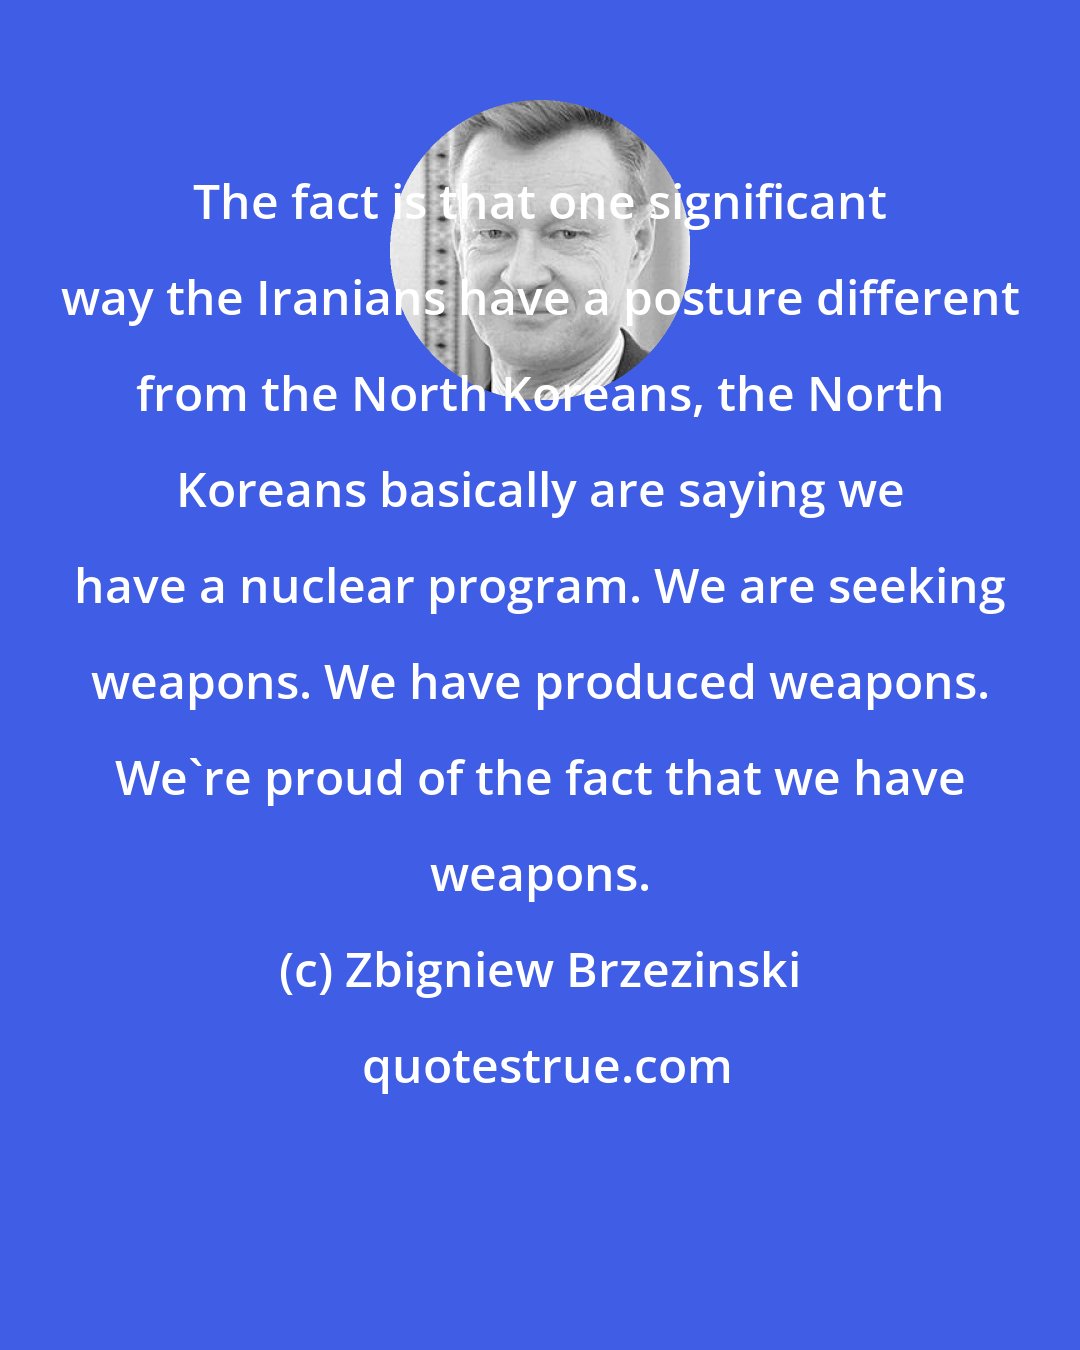 Zbigniew Brzezinski: The fact is that one significant way the Iranians have a posture different from the North Koreans, the North Koreans basically are saying we have a nuclear program. We are seeking weapons. We have produced weapons. We're proud of the fact that we have weapons.